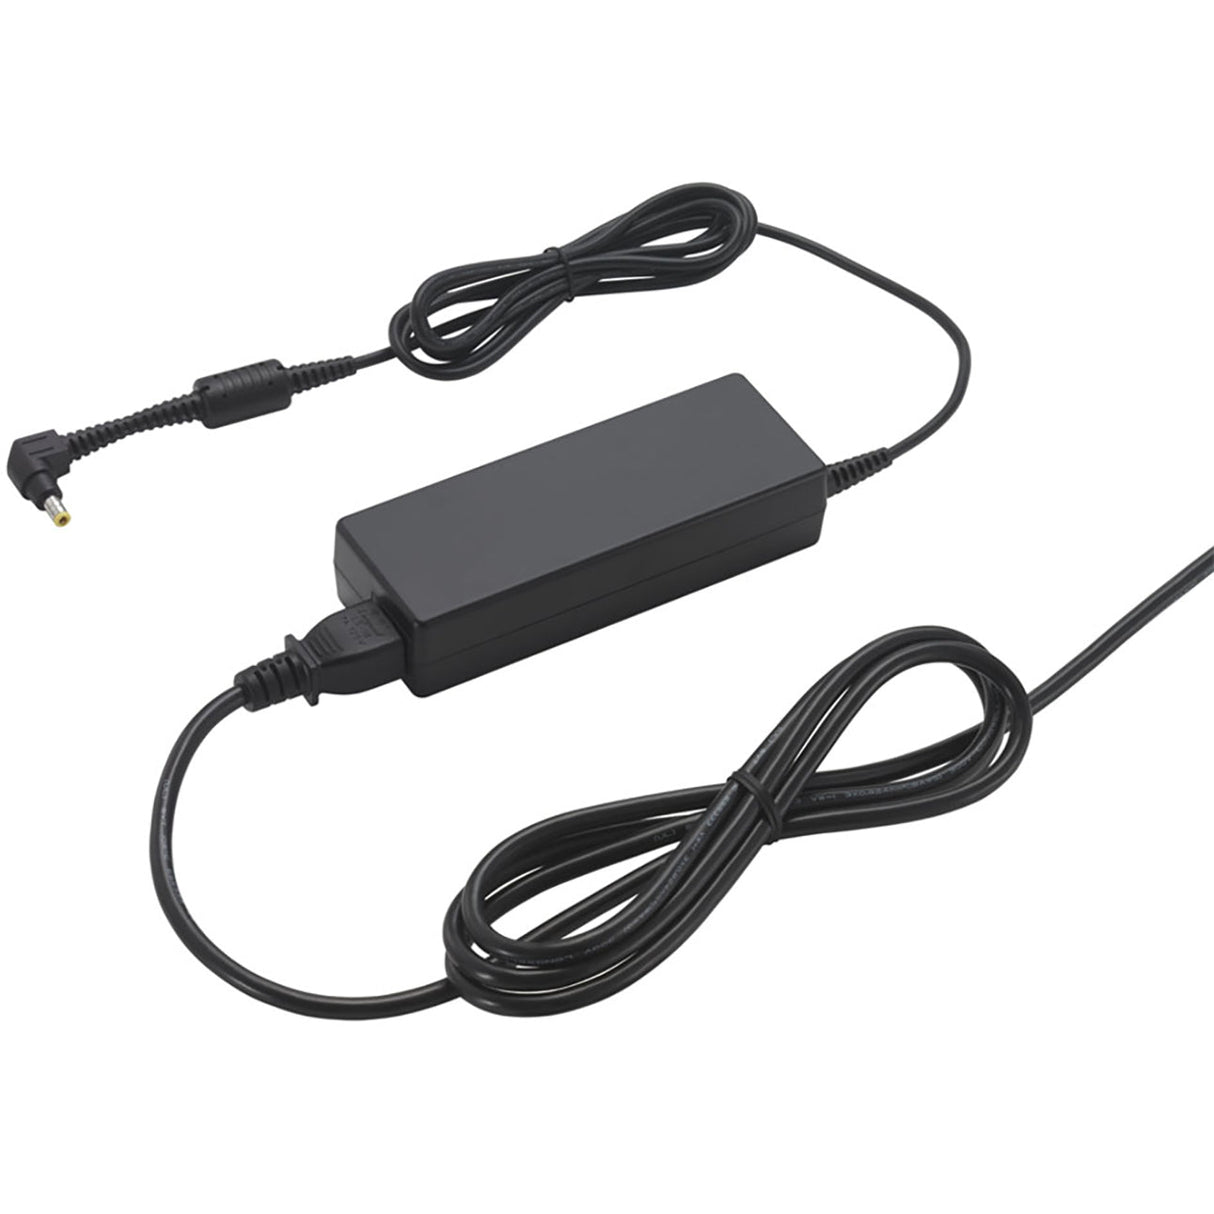 Panasonic 120W AC Power Adapter for Toughbook 52 - CF-AA5803AM